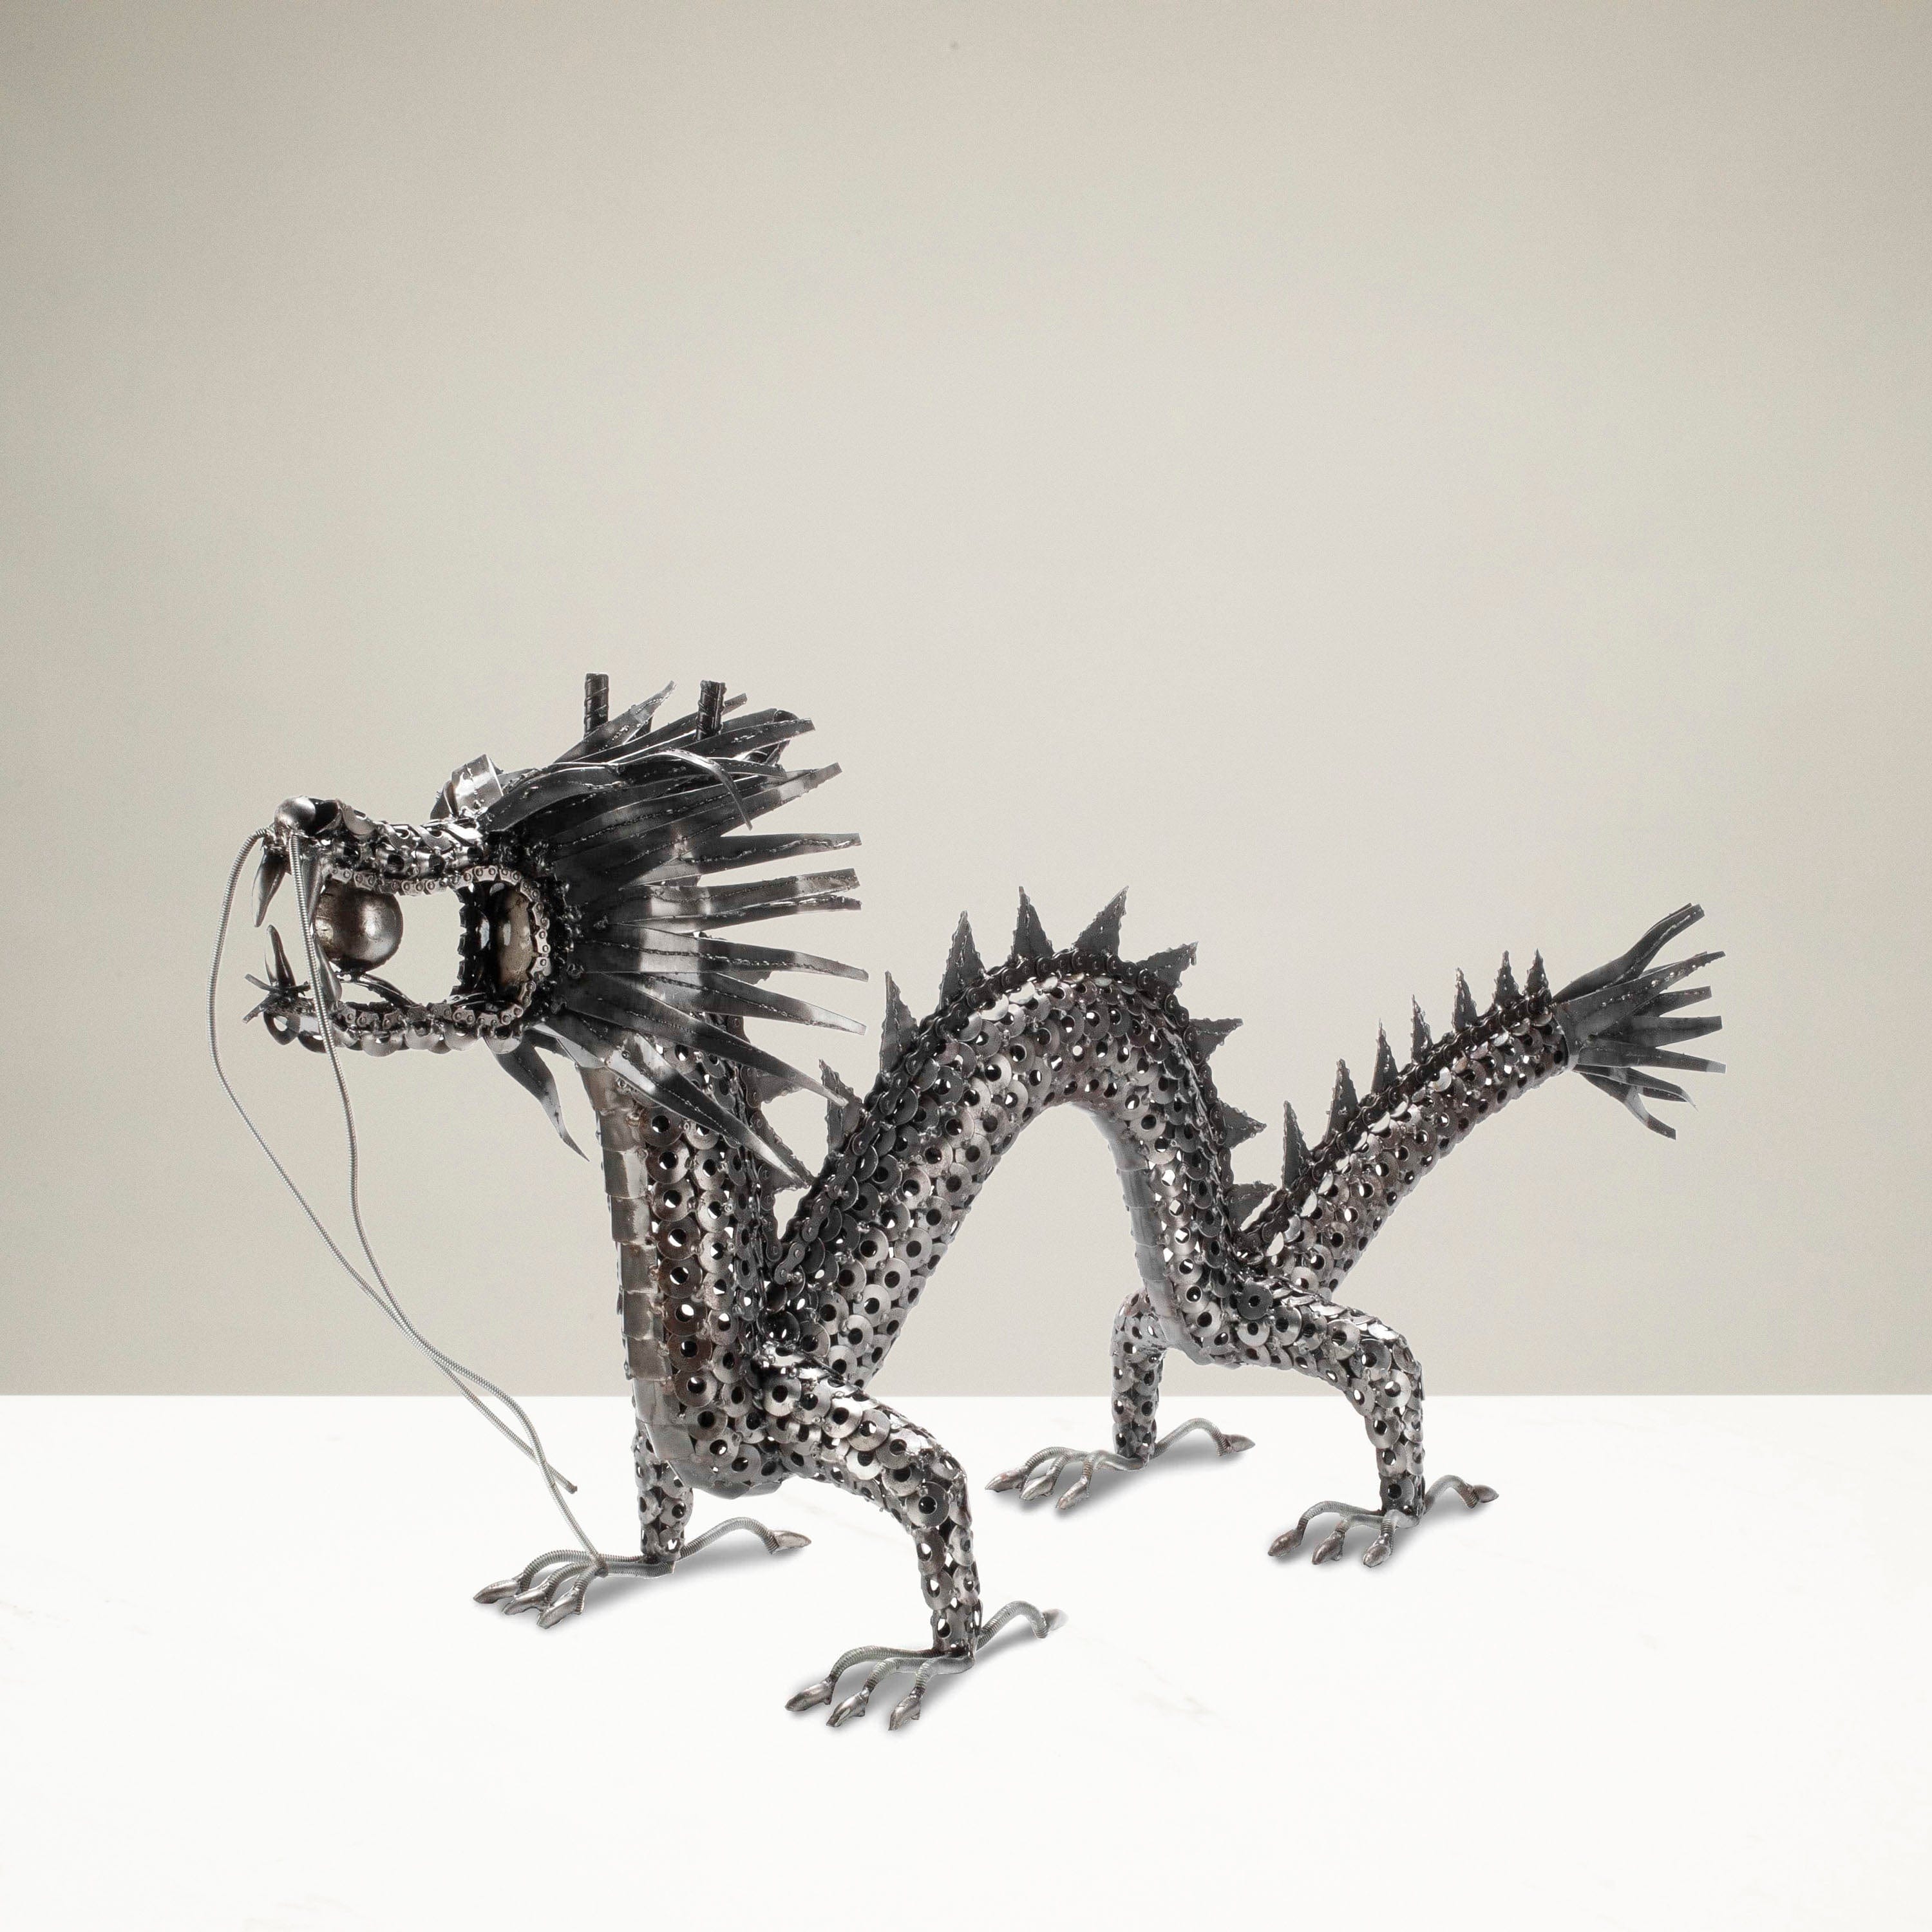 Kalifano Recycled Metal Art Chinese Dragon Recycled Metal Art Sculpture - RMS-CD45-Y